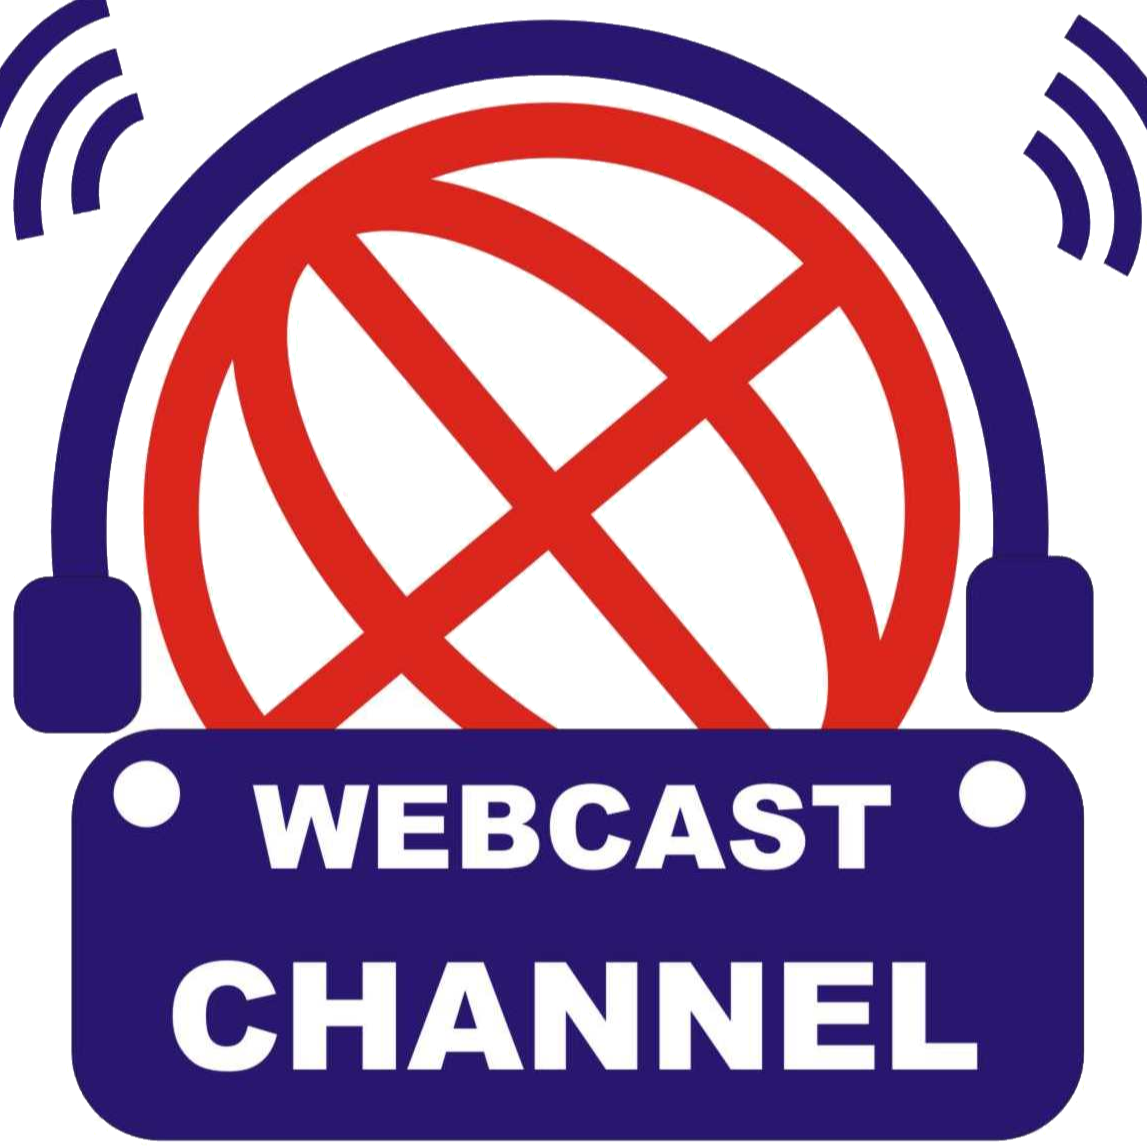 Webcast Channel